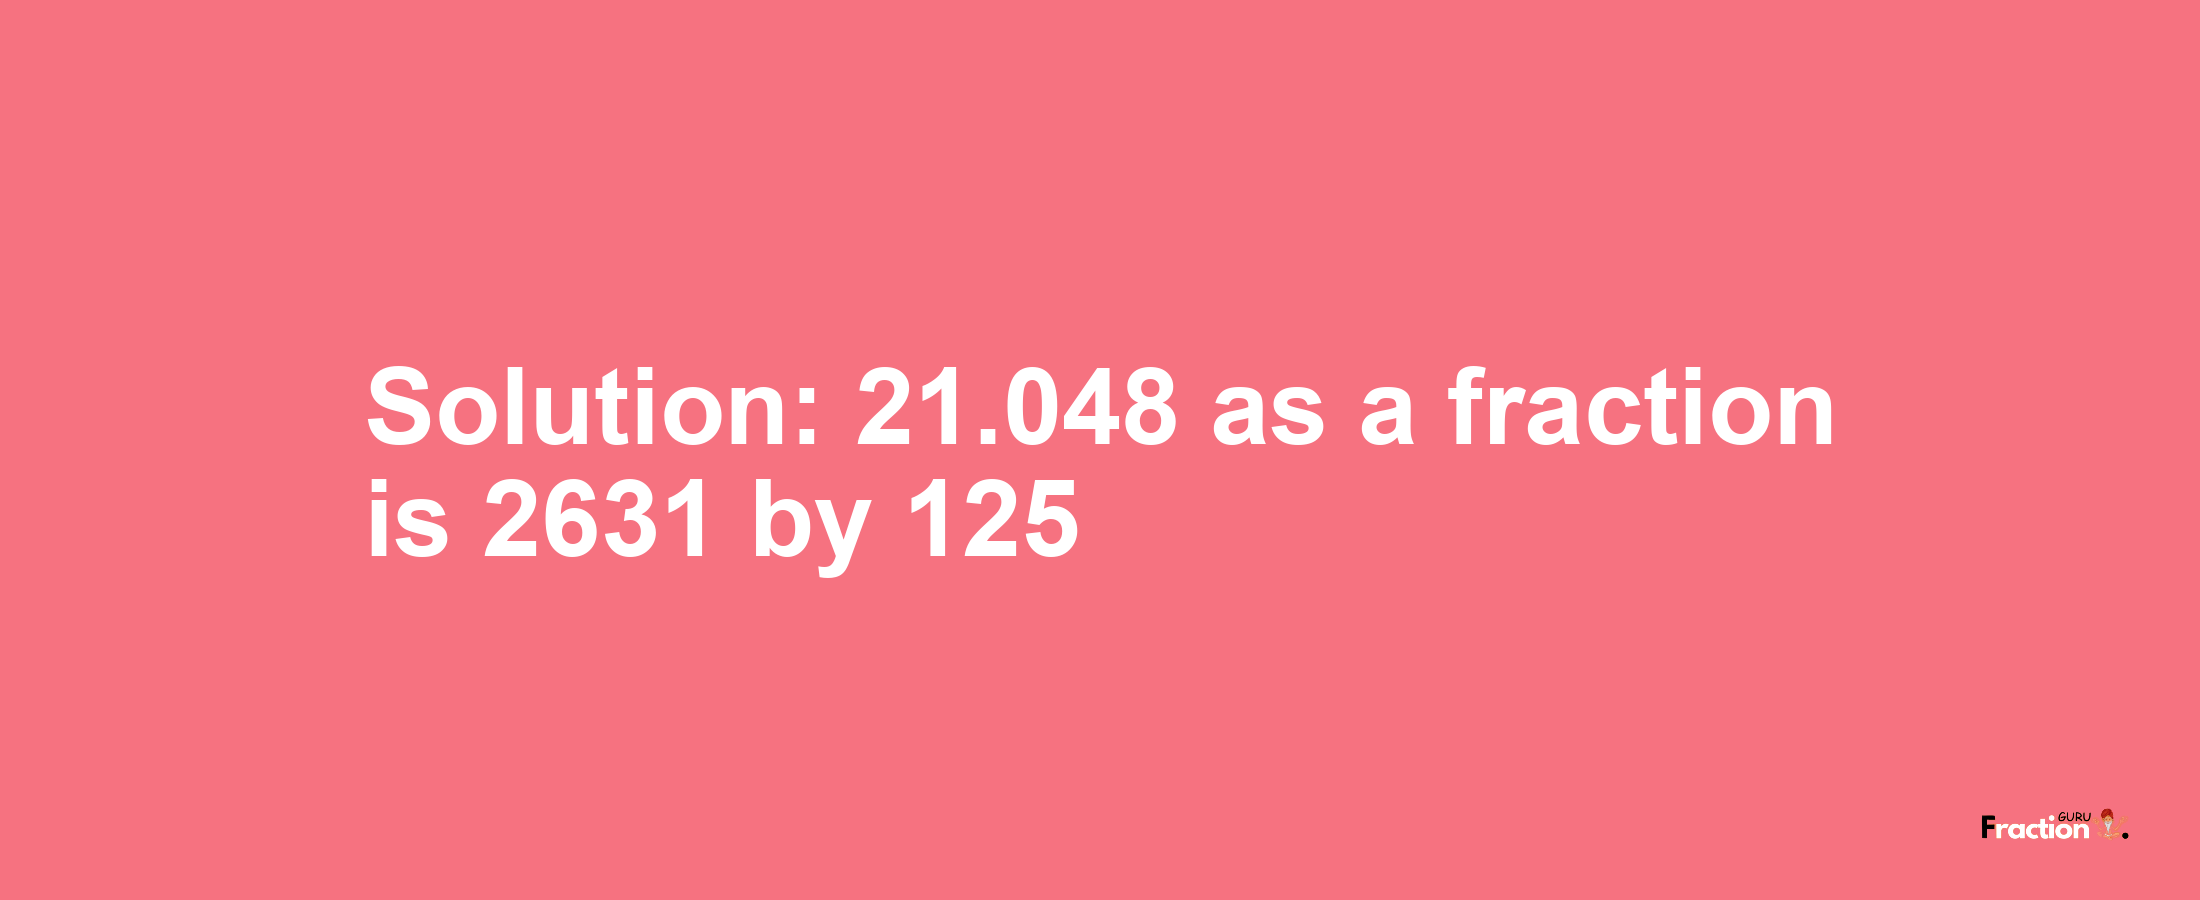 Solution:21.048 as a fraction is 2631/125